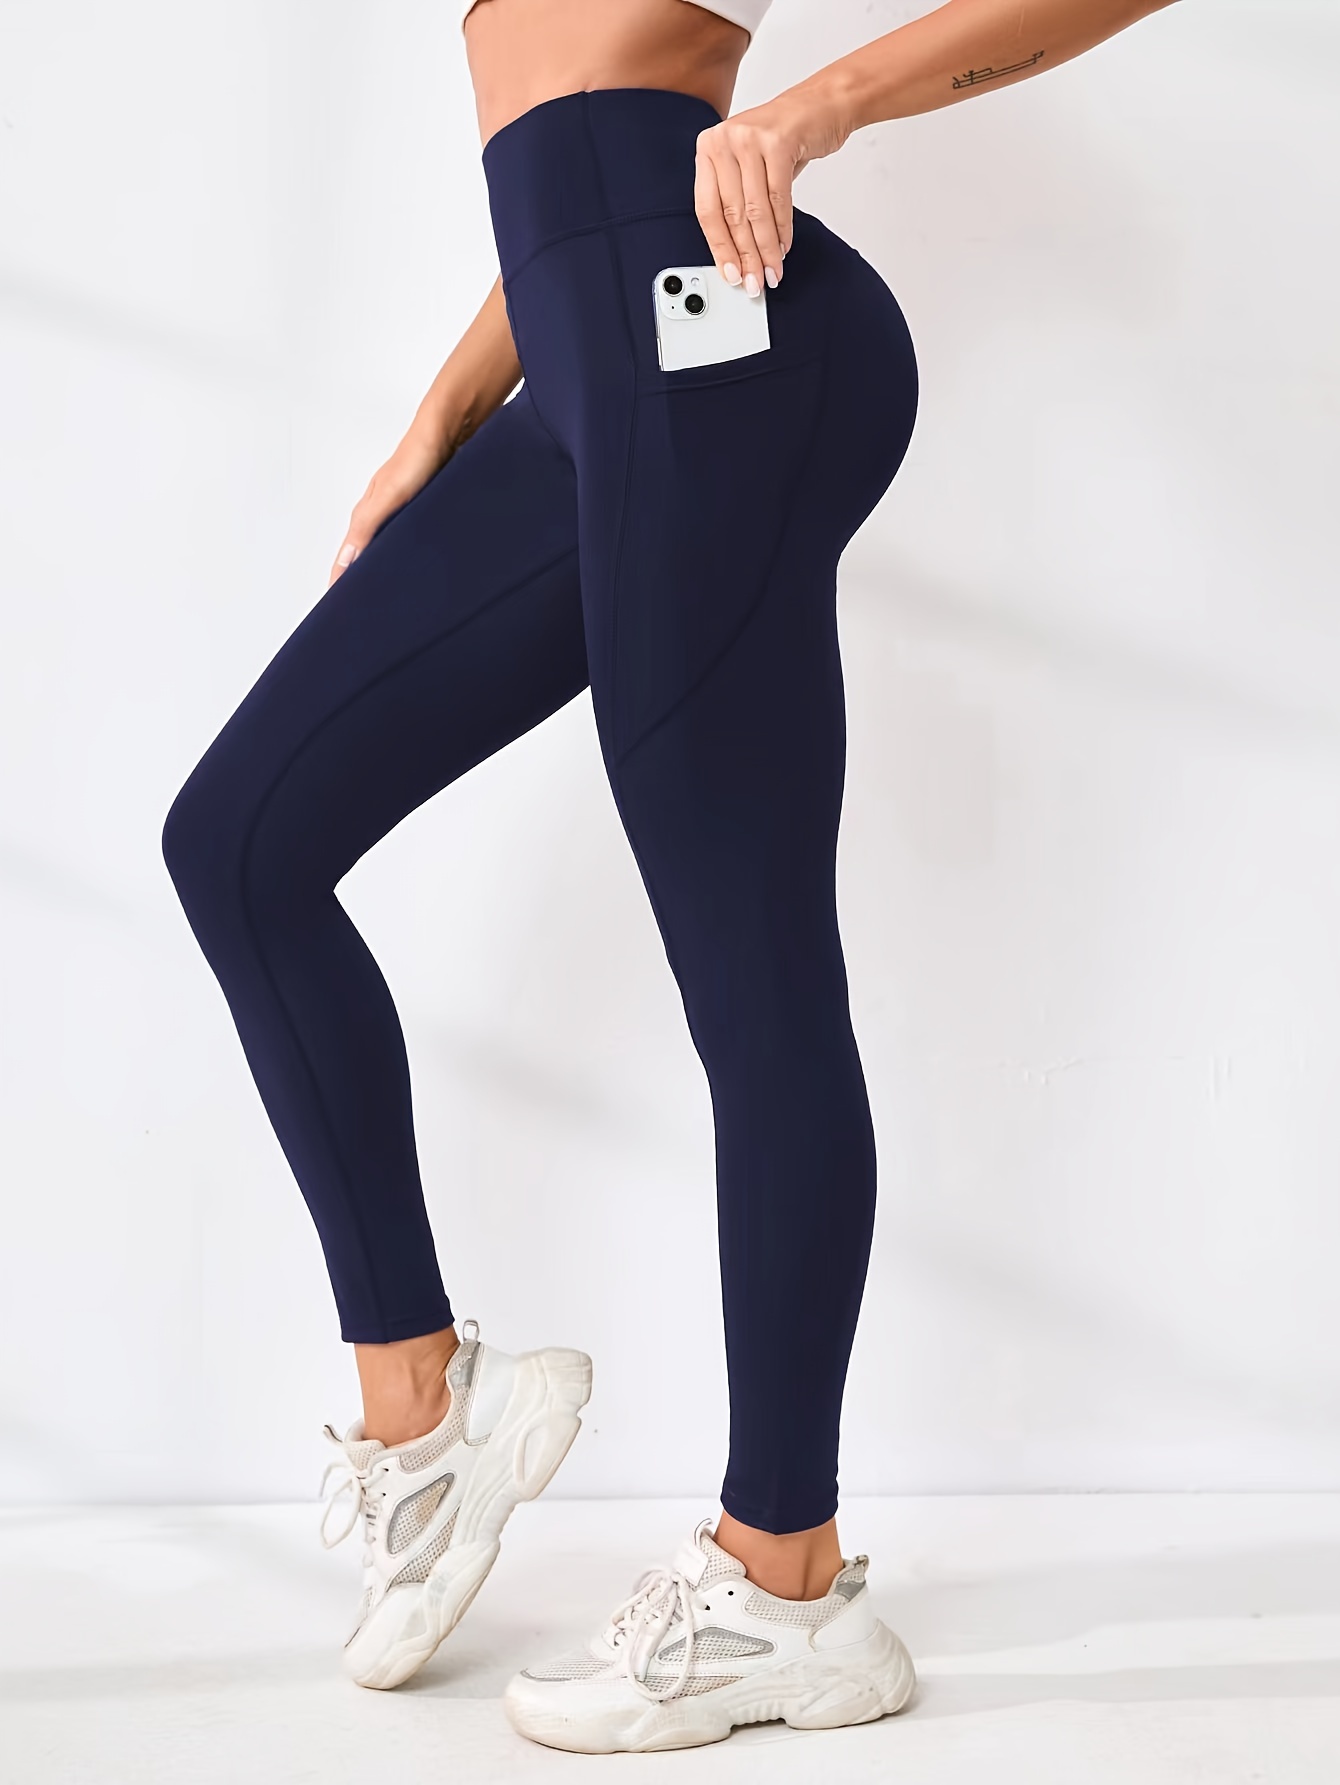 Leggings With Pockets, Gym Tights For Women's Workout